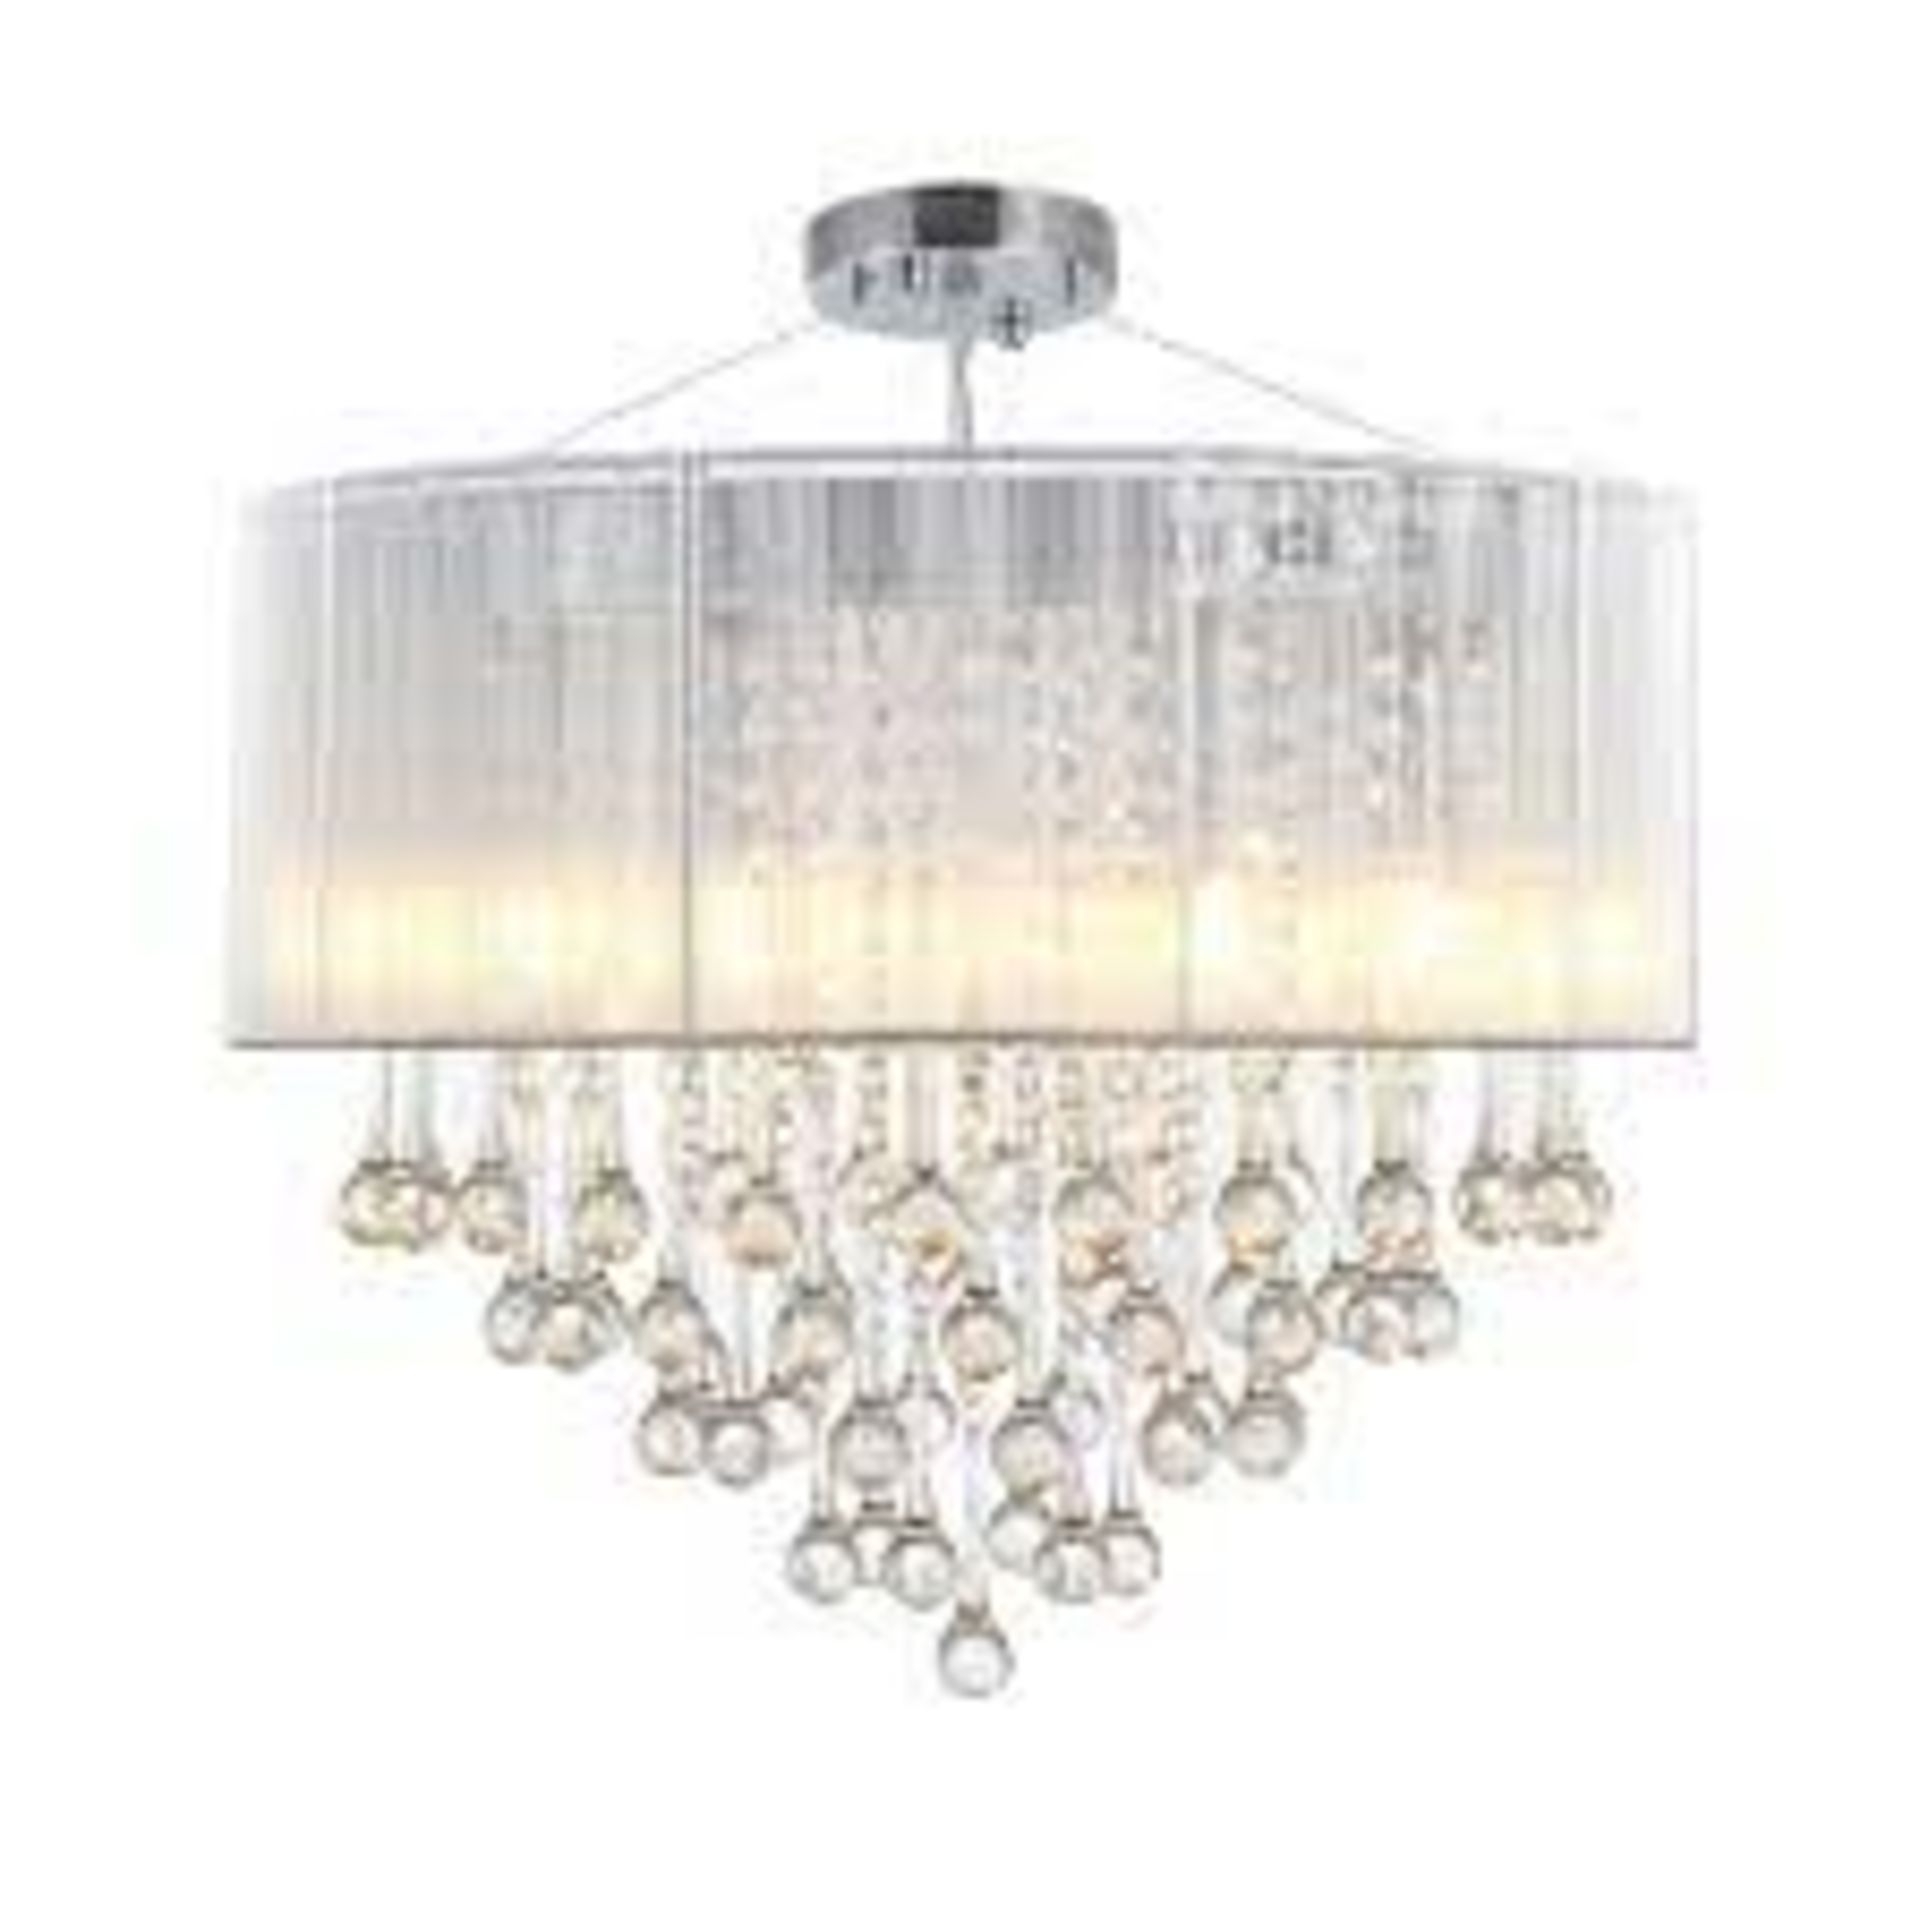 dCrystal Glass Droplet Ceiling Pendant w/ Drum Shade Silver - SR4